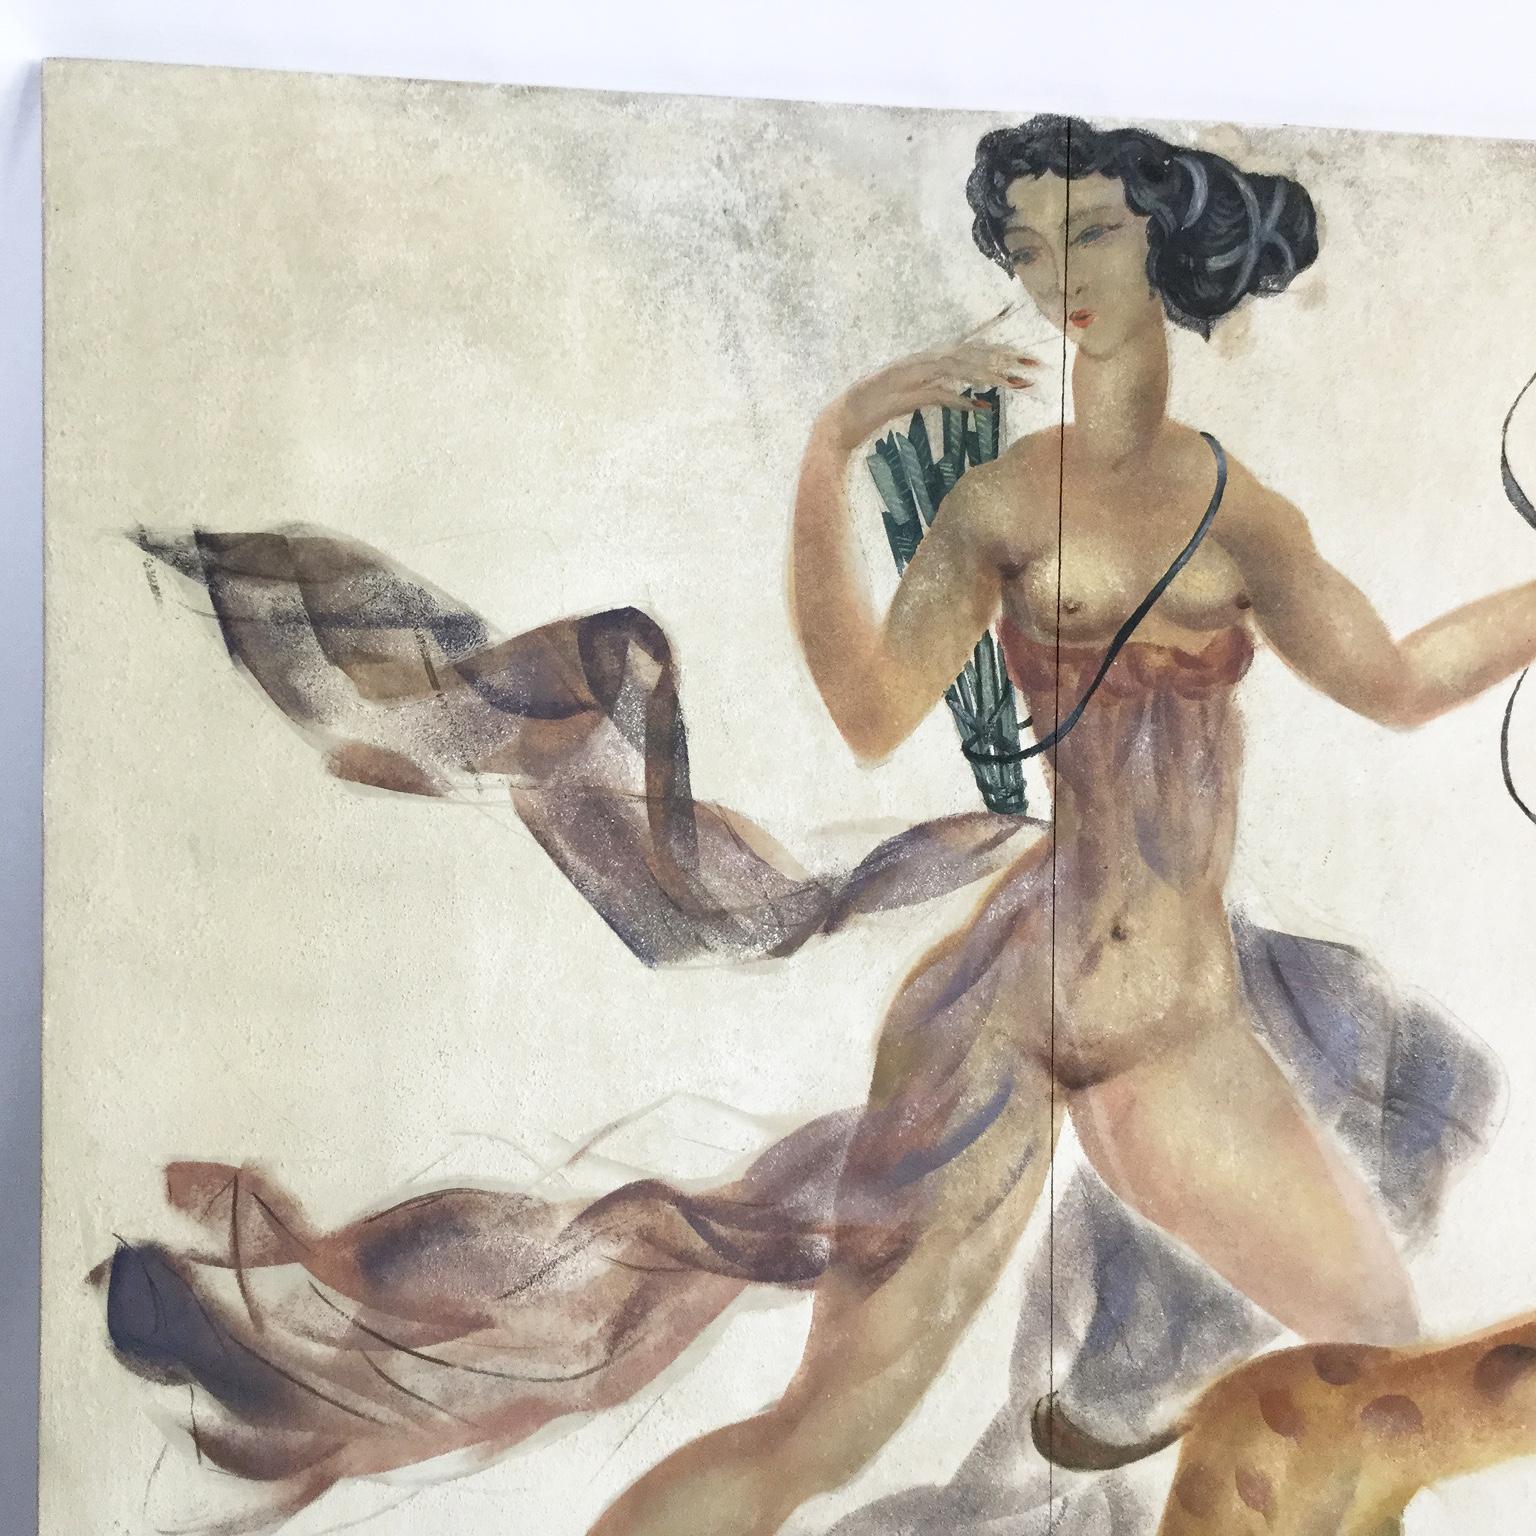 1950s Decorative Art Nude Painting on Masonite Panel in a Style of Art Deco 2